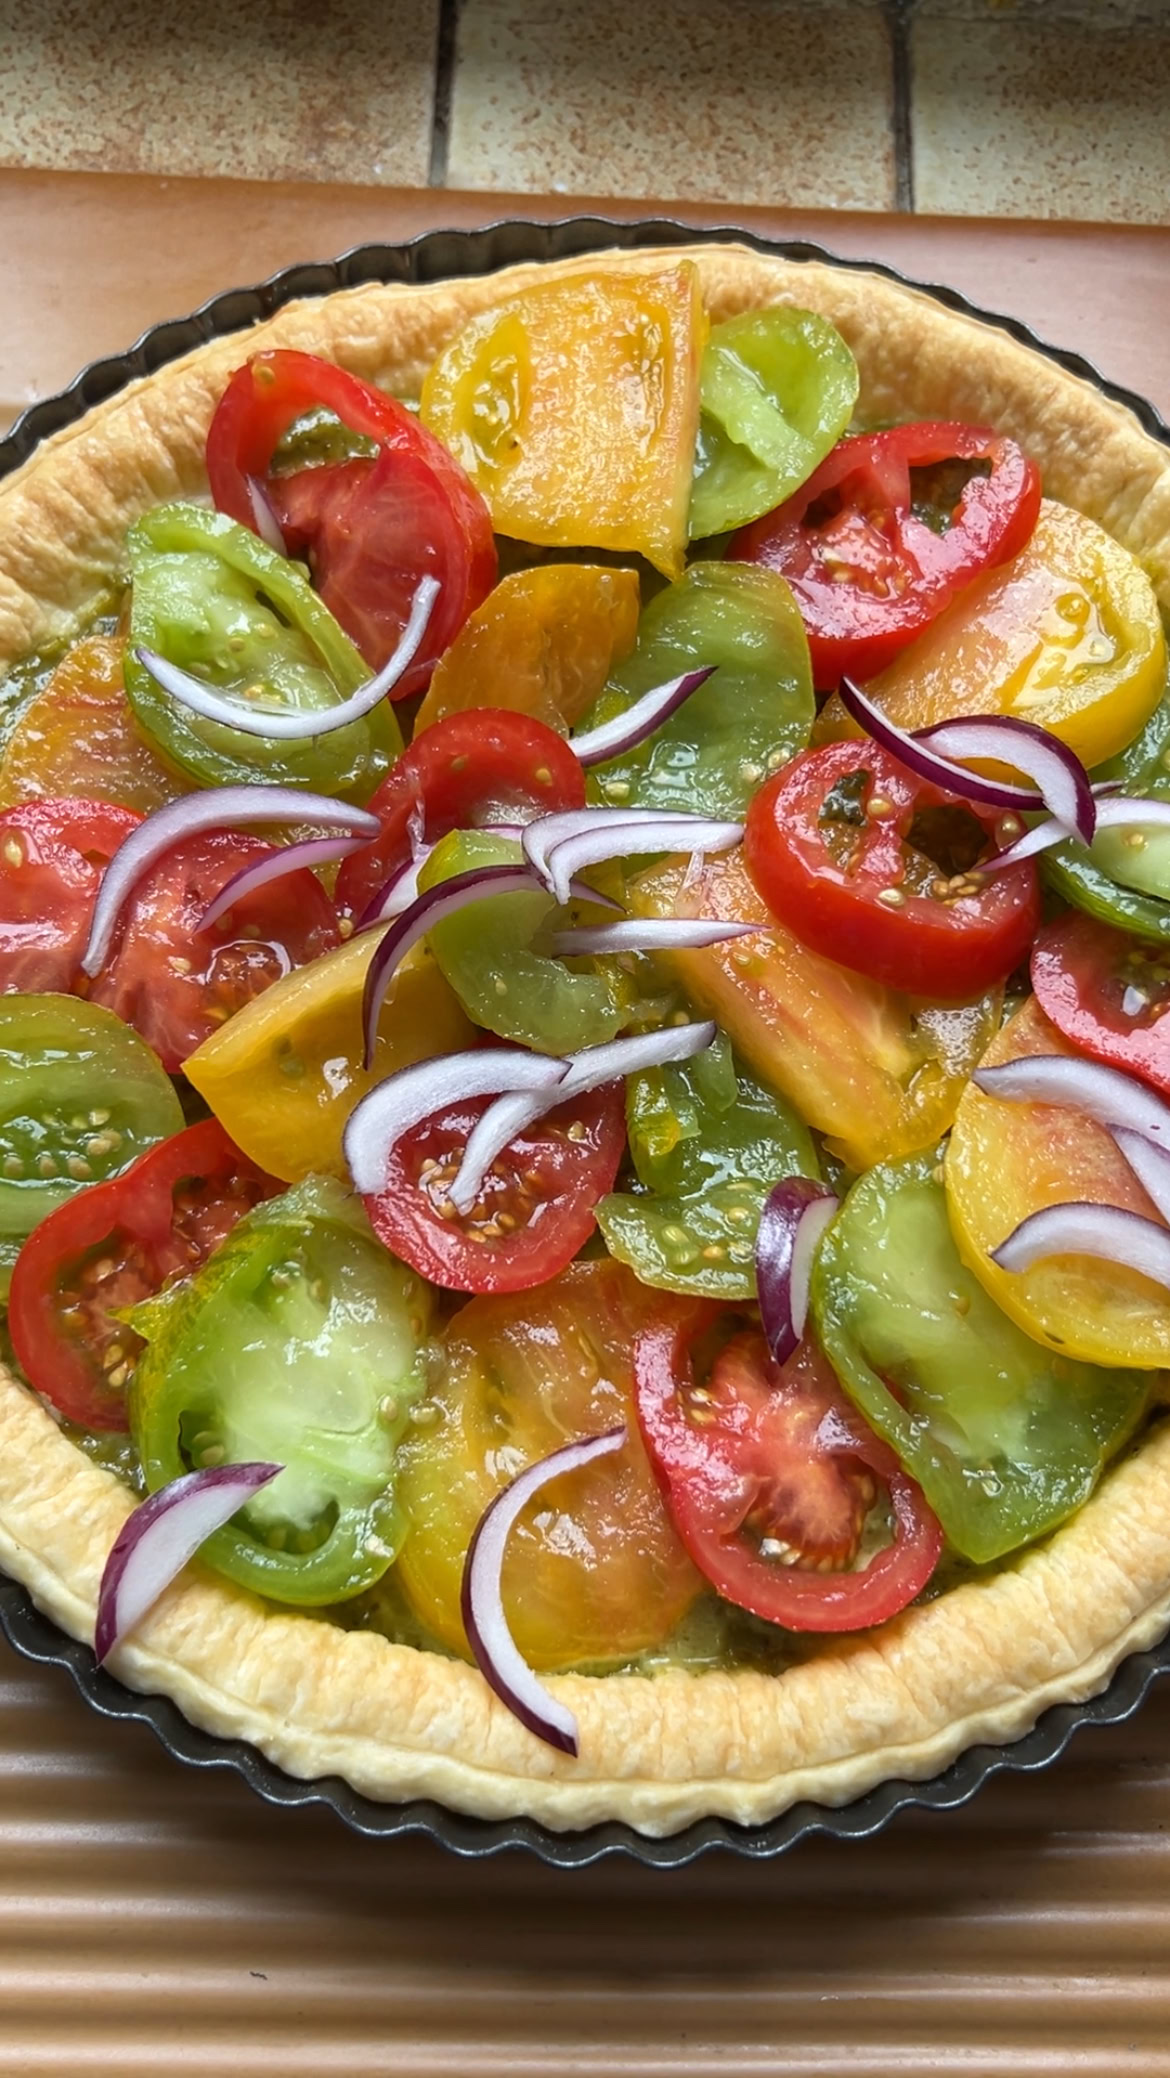 Slices of tomato added to puff pastry, with a few slices of red onion.